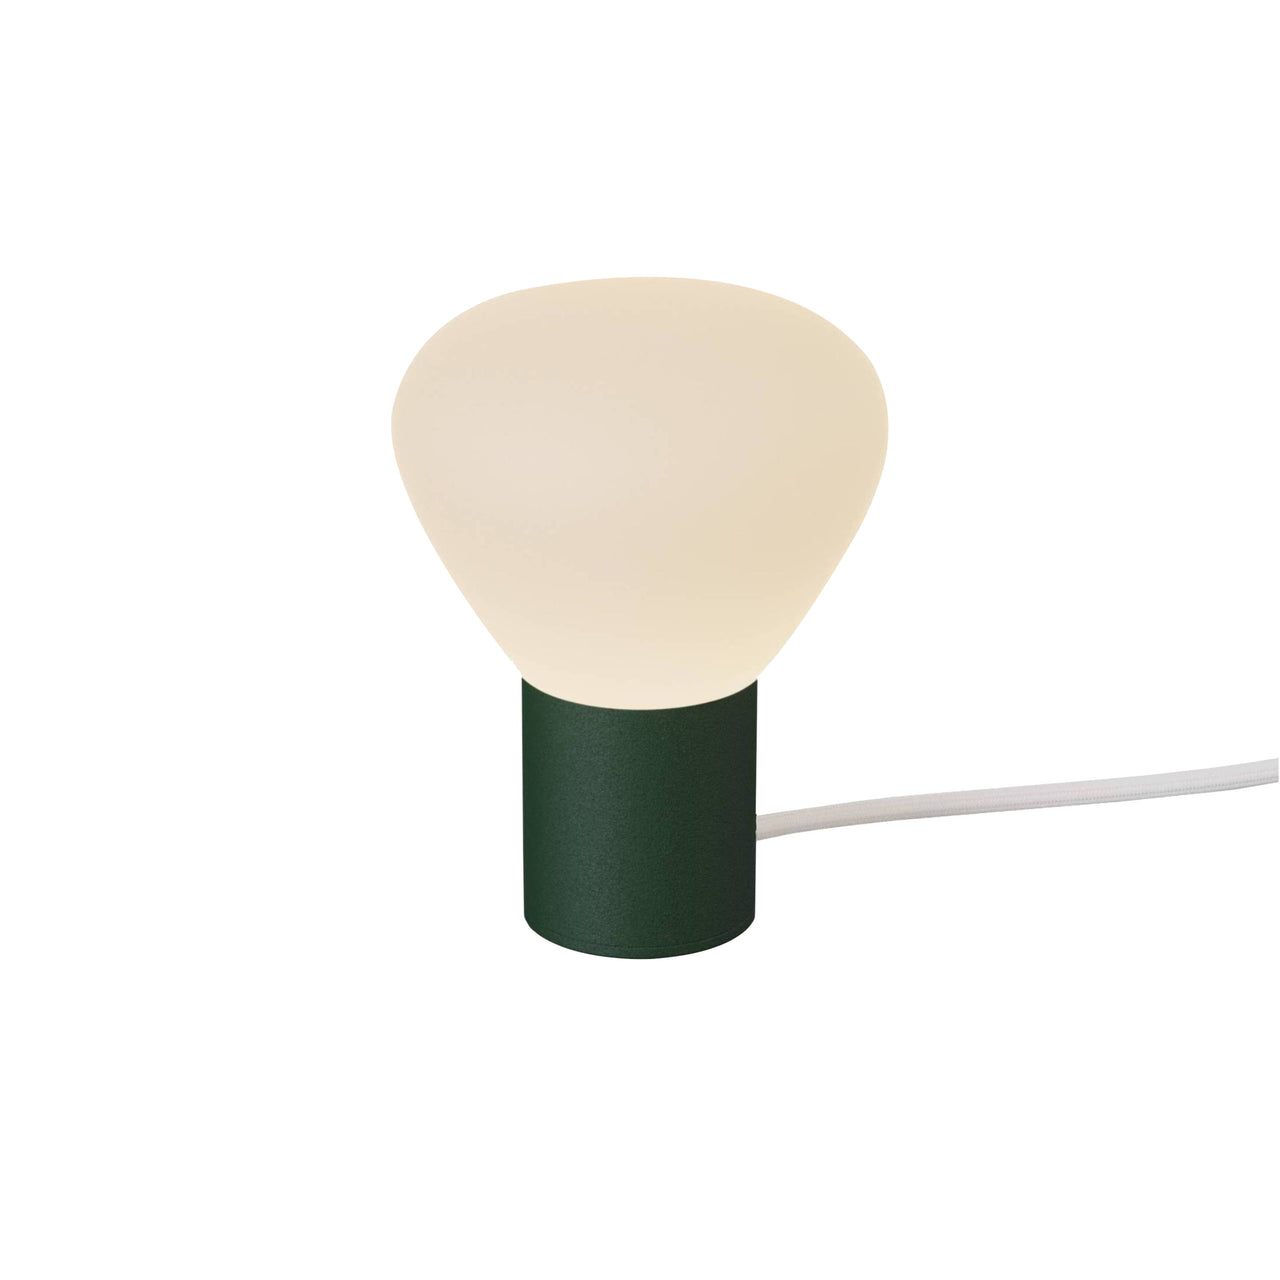 Parc 01 Table Lamp: Footswitch + Green + White